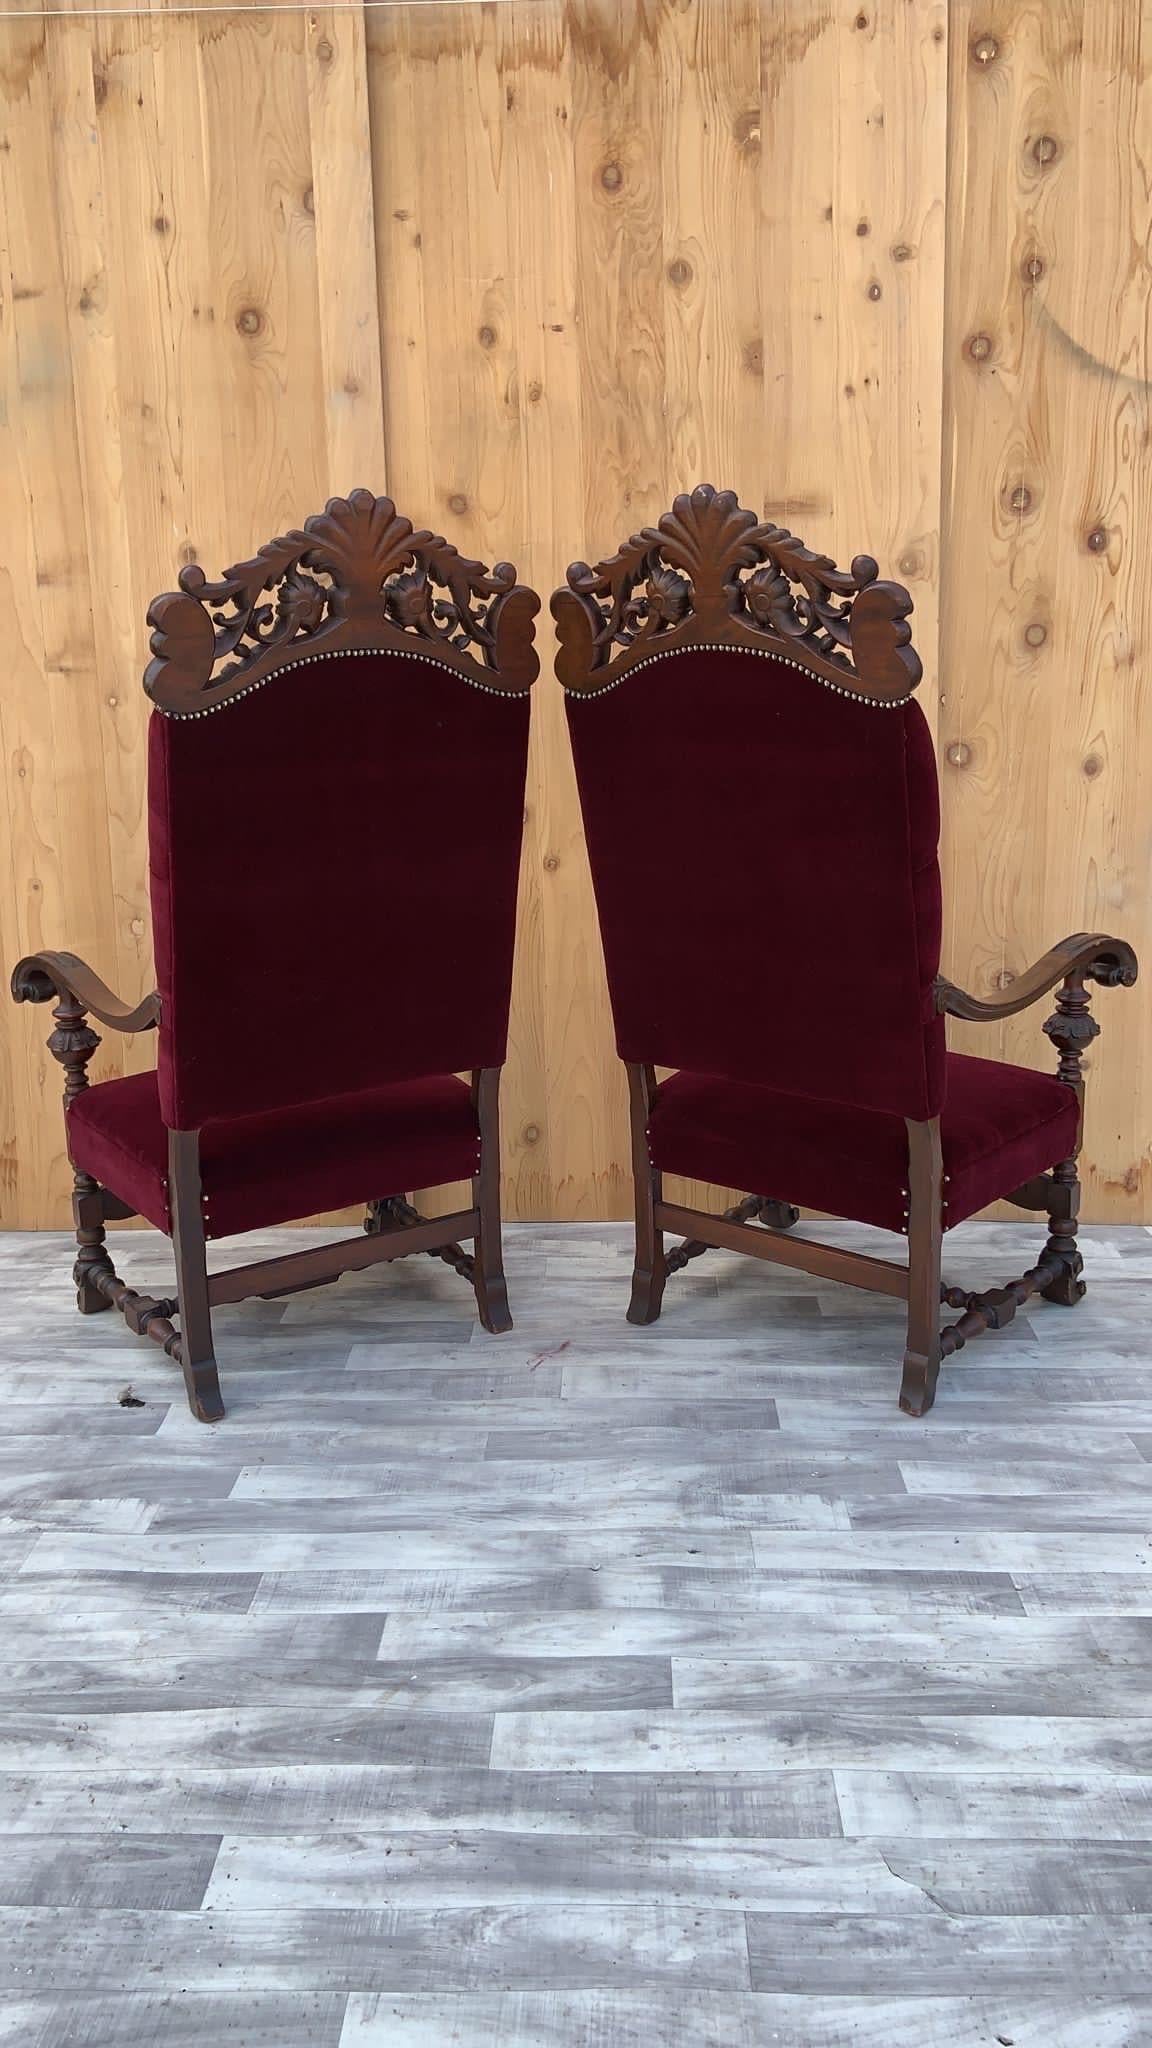 Antique French Regency Style Caved Walnut Throne Chairs Newly Upholstered, Pair For Sale 6